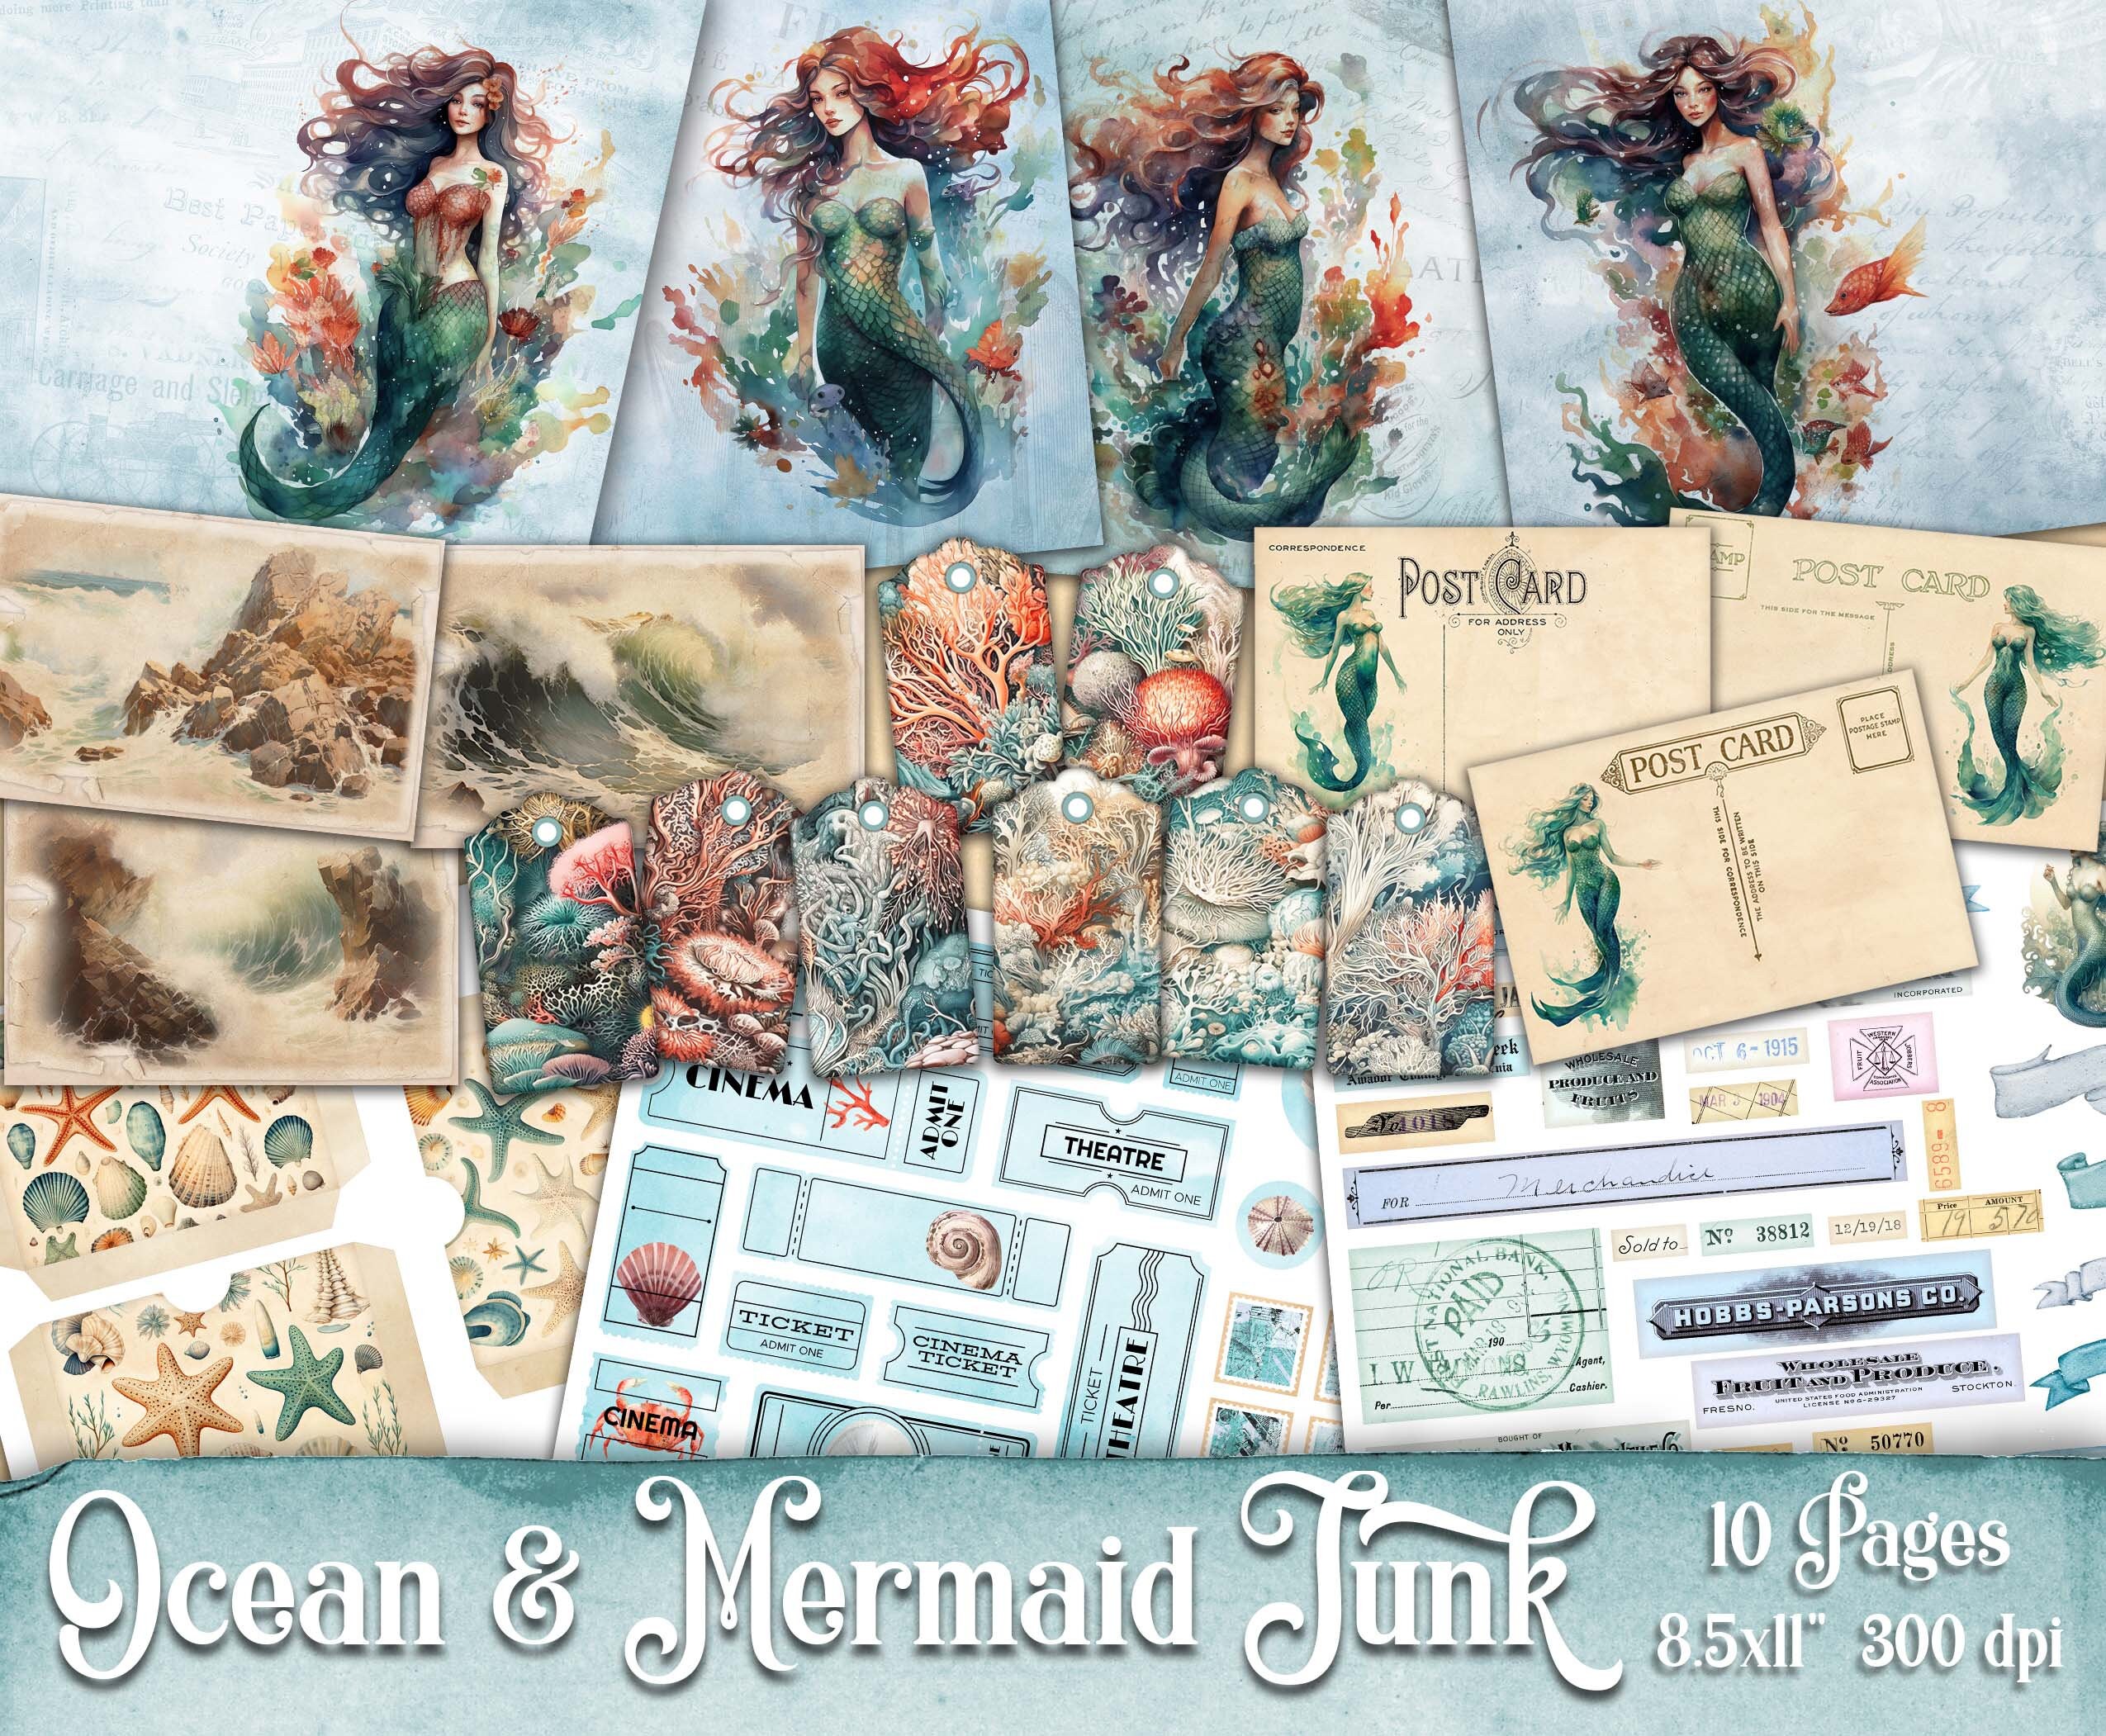 Mermaid Beach Art Box Craft Box. Arts and Crafts for Girls. 6 Art Projects  in Each Box. the Crafty Fox Box by Studio Jen Hughes. 